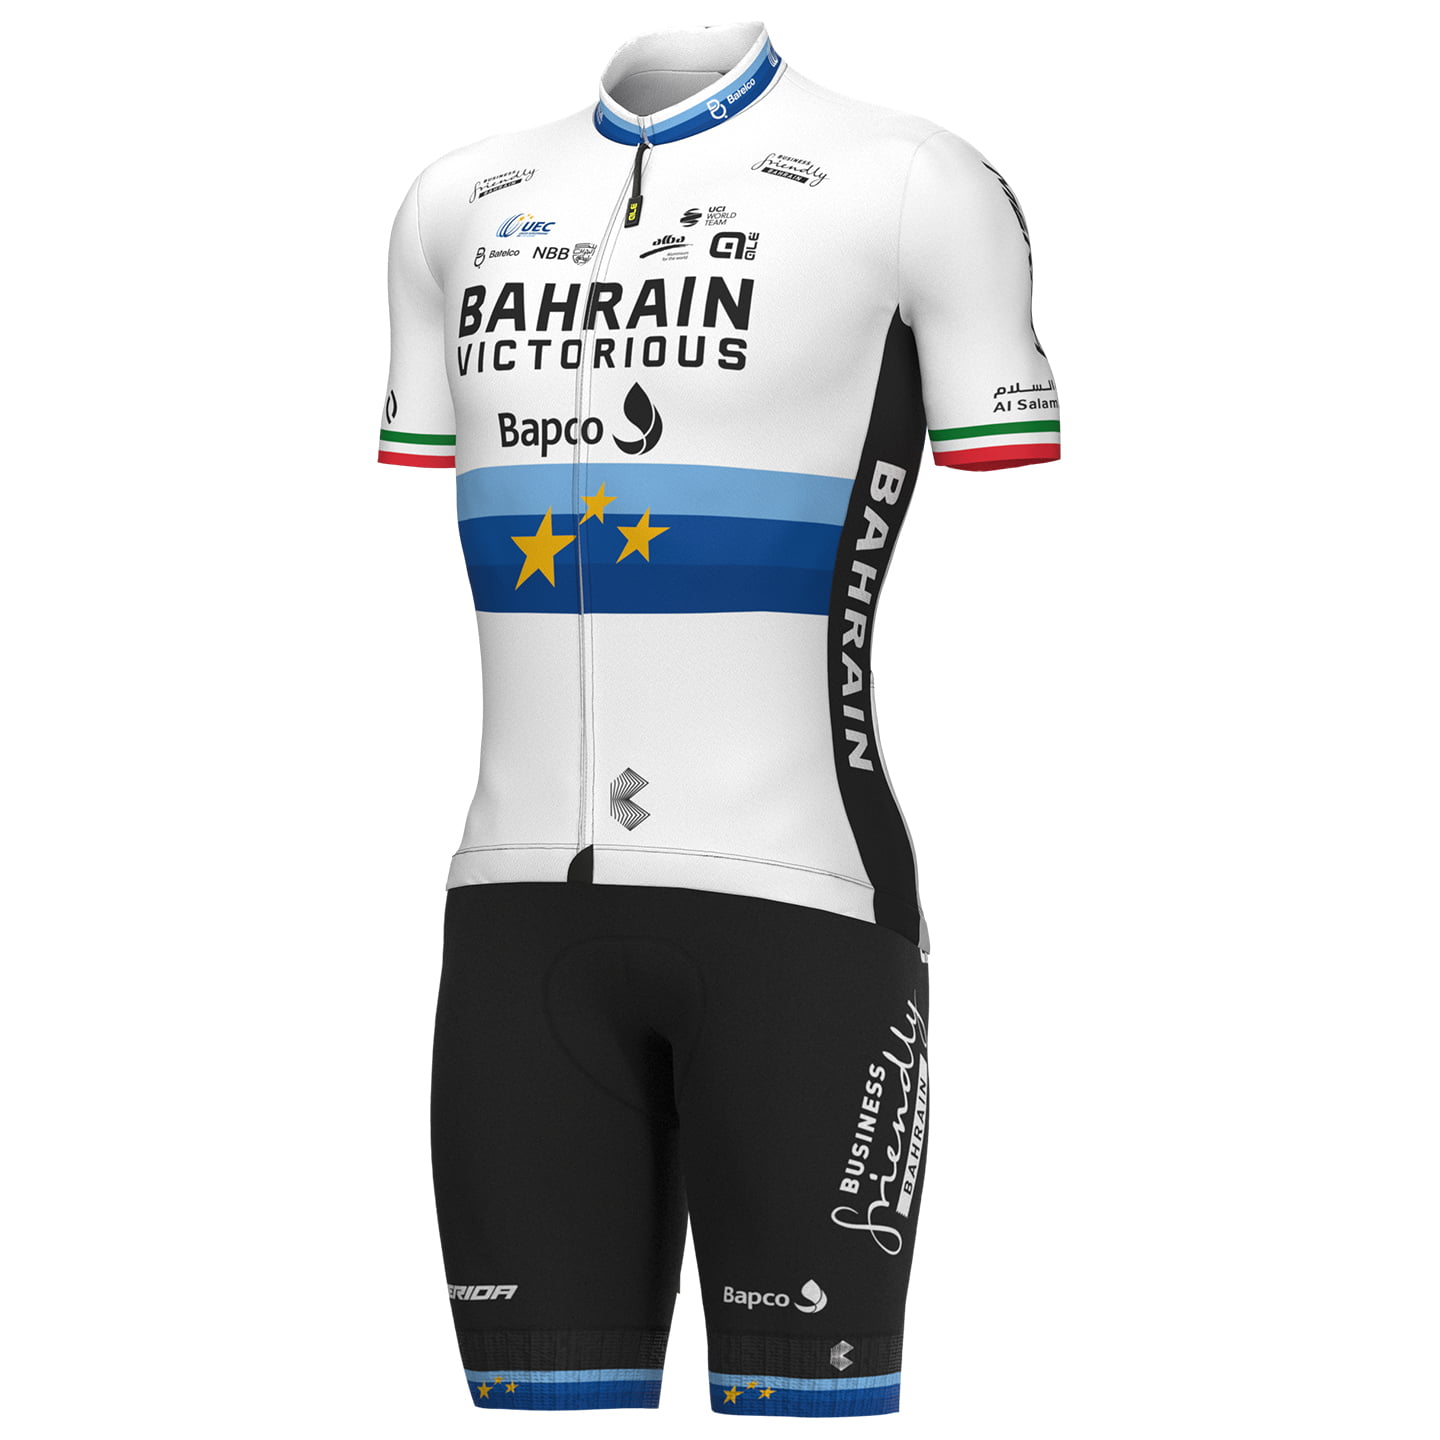 BAHRAIN - VICTORIOUS European Champion 2022 Set (cycling jersey + cycling shorts) Set (2 pieces), for men, Cycling clothing